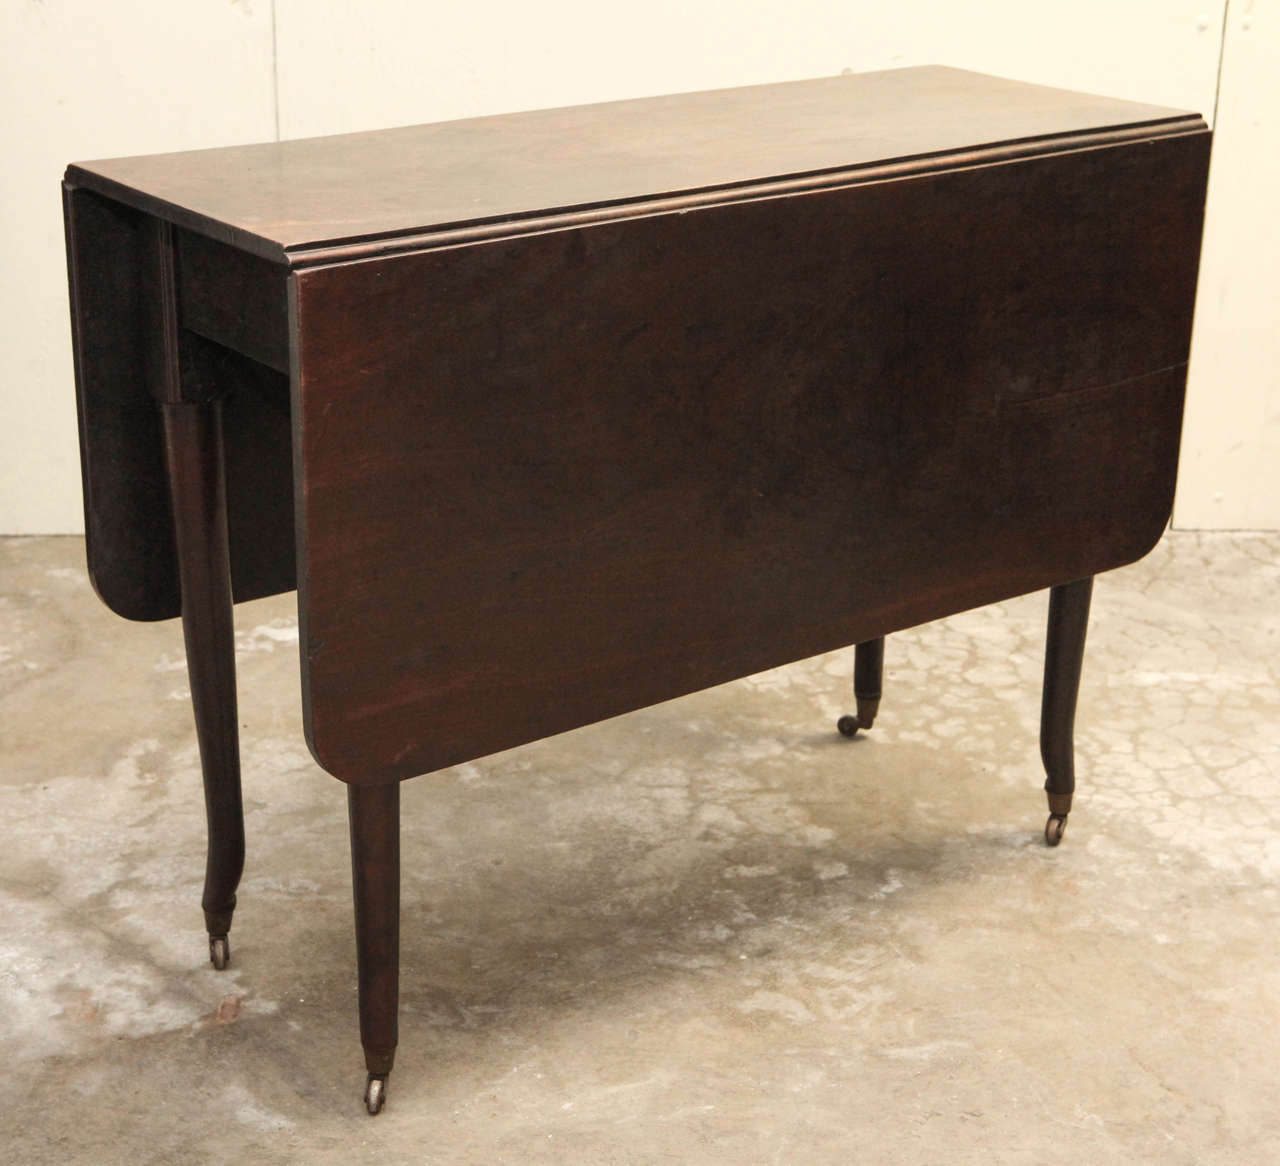 Late 18th century plum pudding mahogany drop-leaf dining, gaming, or side table from England. Legs with bronze castors are able to extend the table.